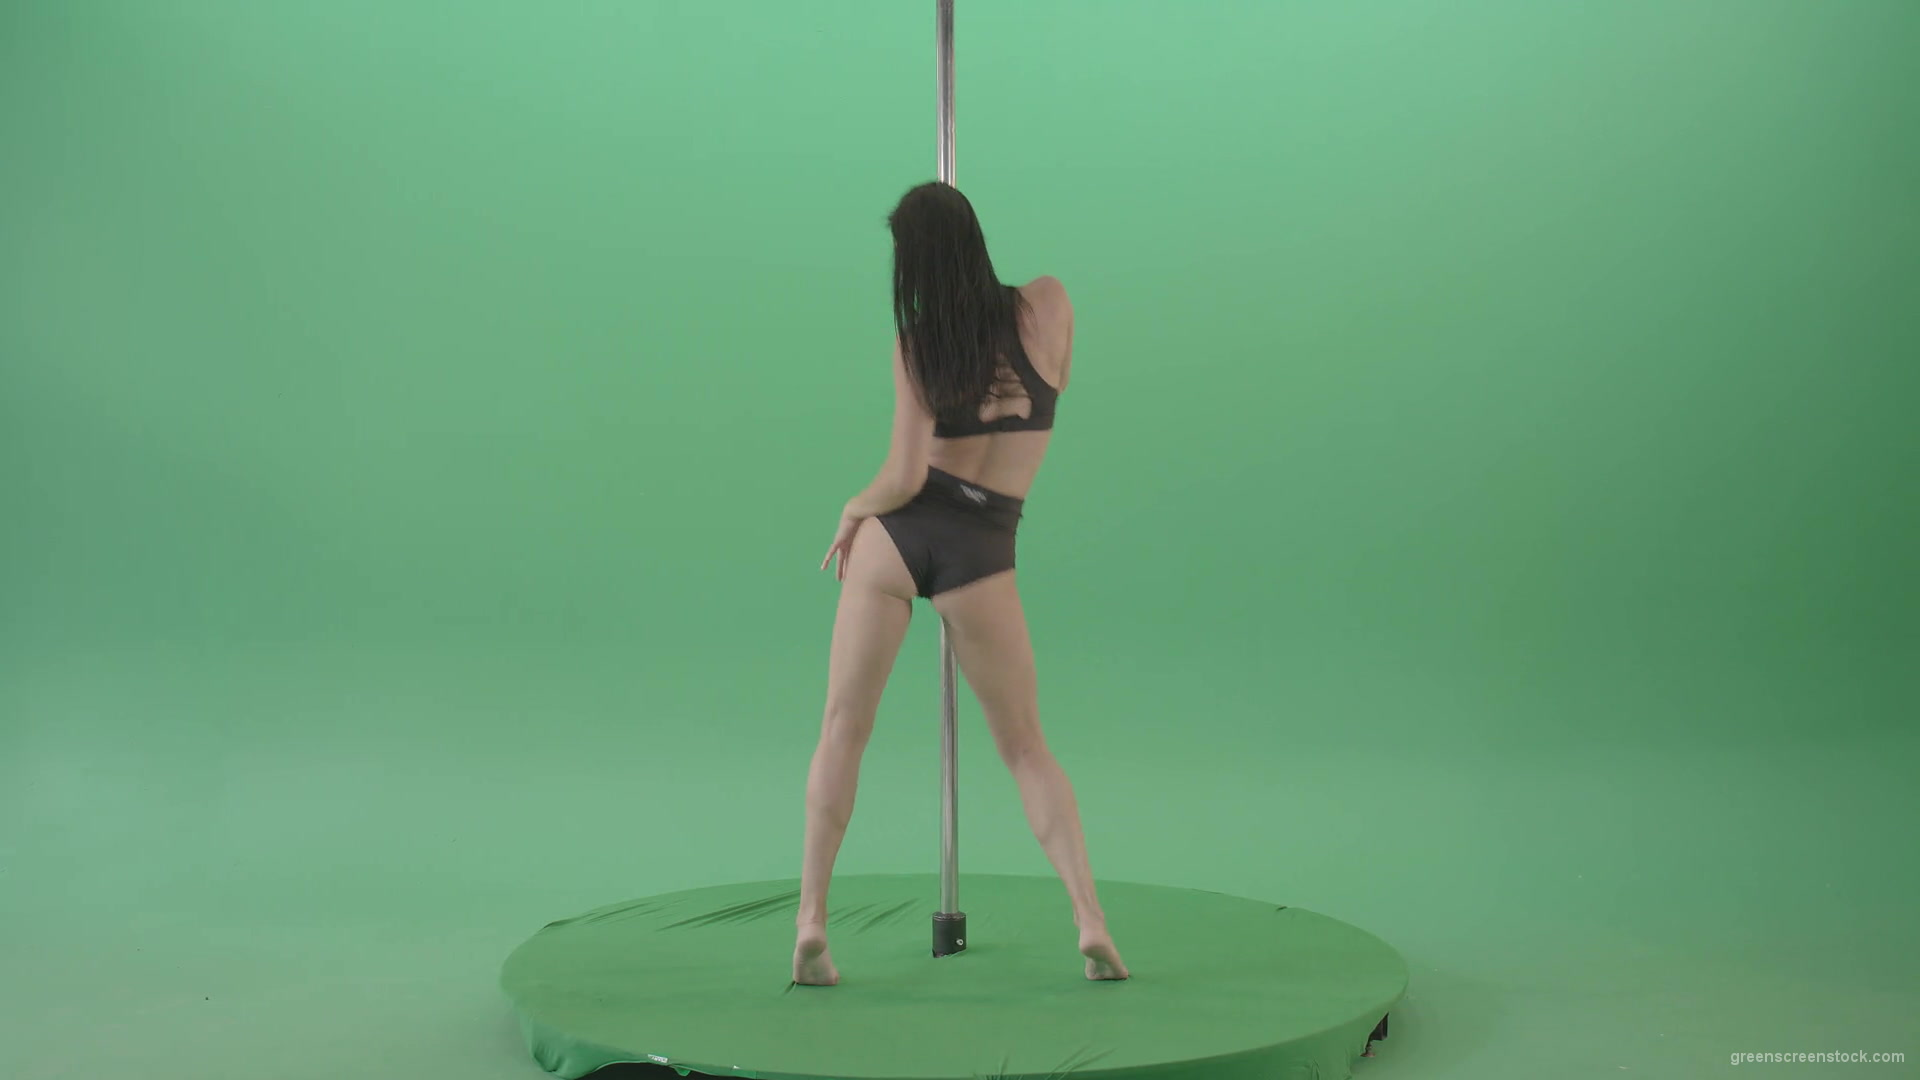 vj video background Brunette-Strip-Model-Girl-has-fun-on-dancing-pole-isolated-on-Green-Screen-4K-Video-Footage-1920_003